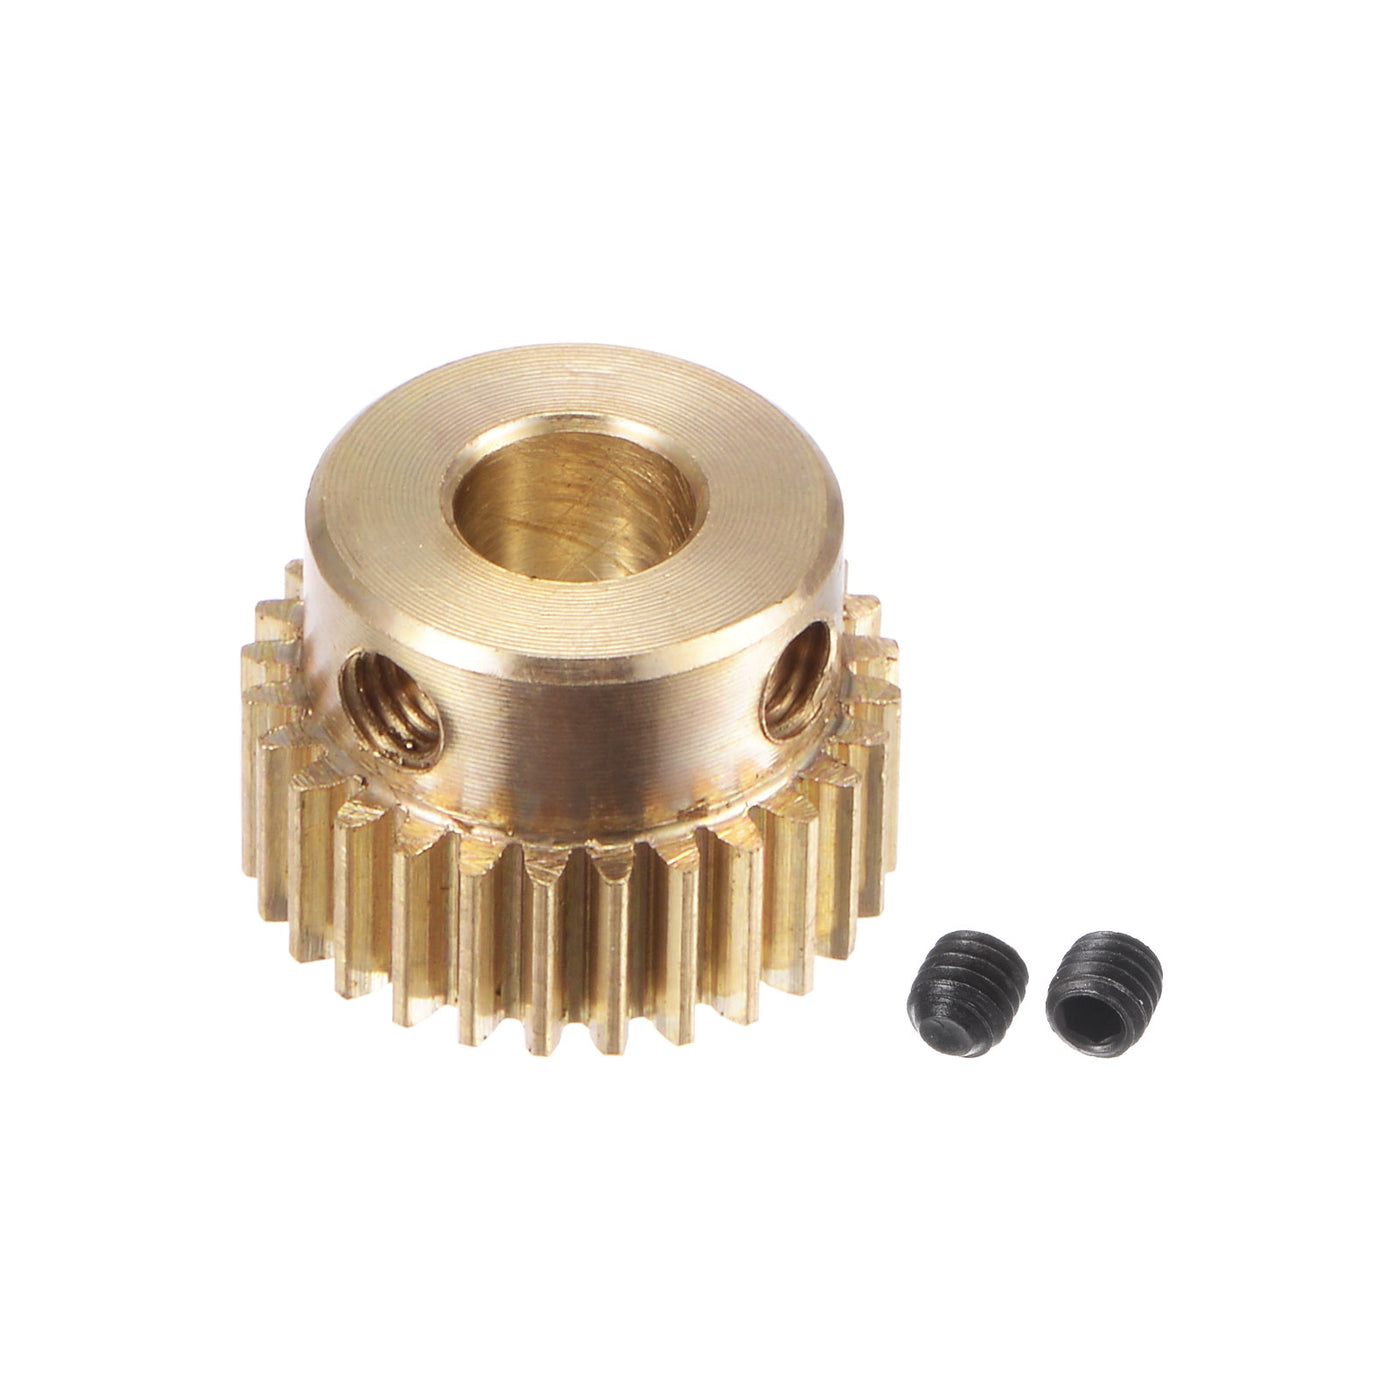 uxcell Uxcell 0.5 Mod 28T 5mm Bore 15mm Outer Dia Brass Motor Rack Pinion Gear with Screws